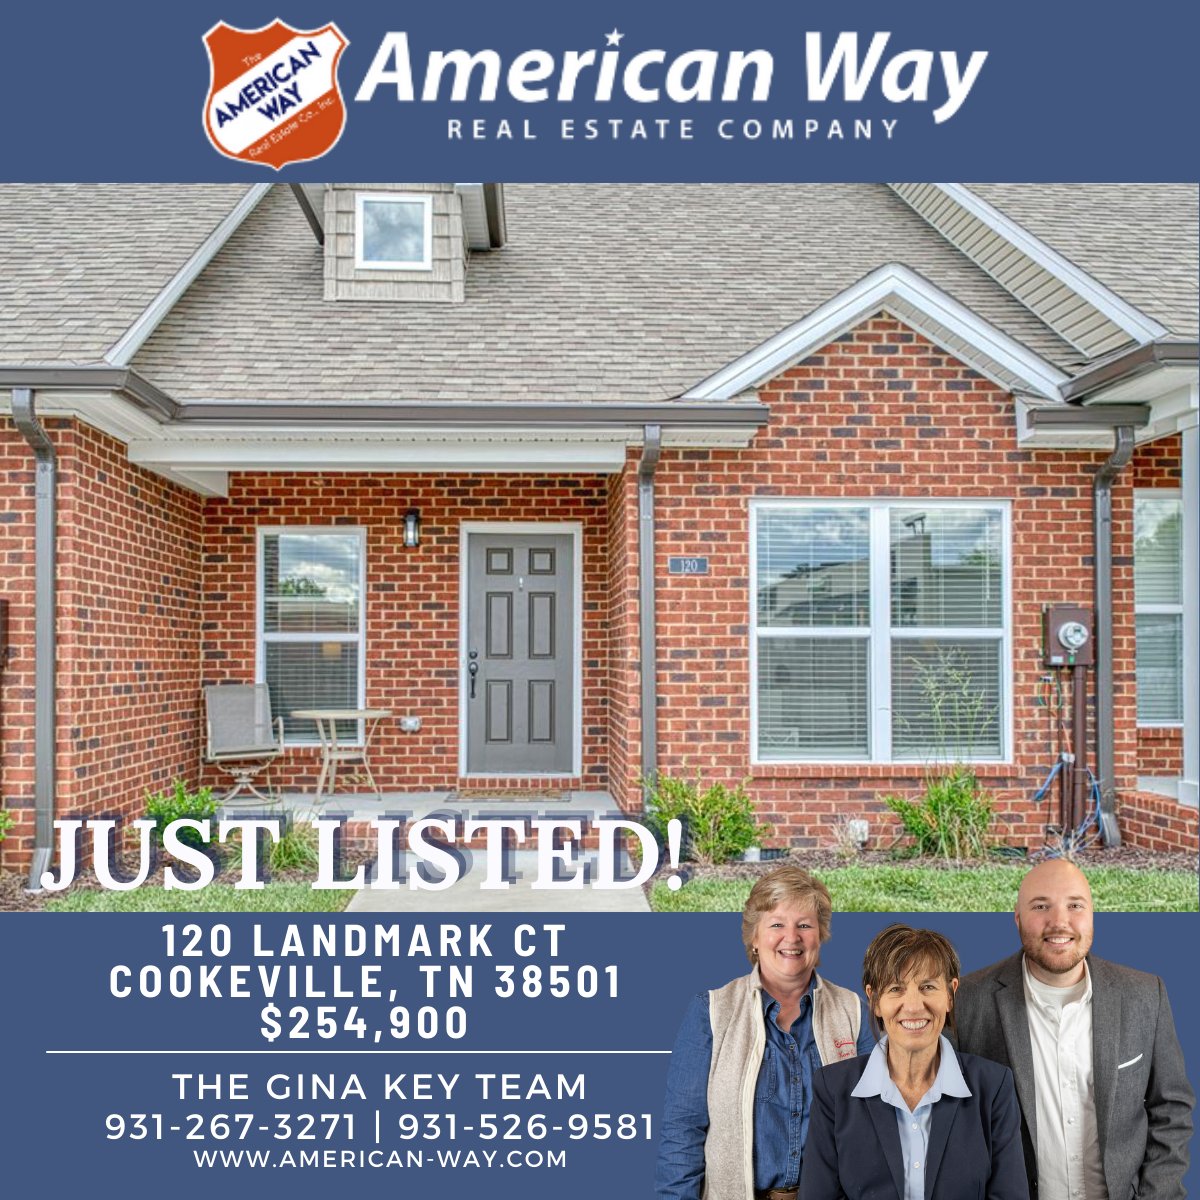 ‼️JUST LISTED‼️
Check out this new listing from The Gina Key Team! 😍
Contact American Way Real Estate for more info! 🏡
zurl.co/UYip 
📞931-526-9581
#AmericanWayRealEstate #CookevilleTN #TNRealEstate #justlisted #TheGinaKeyTeamAmericanWayRealtors